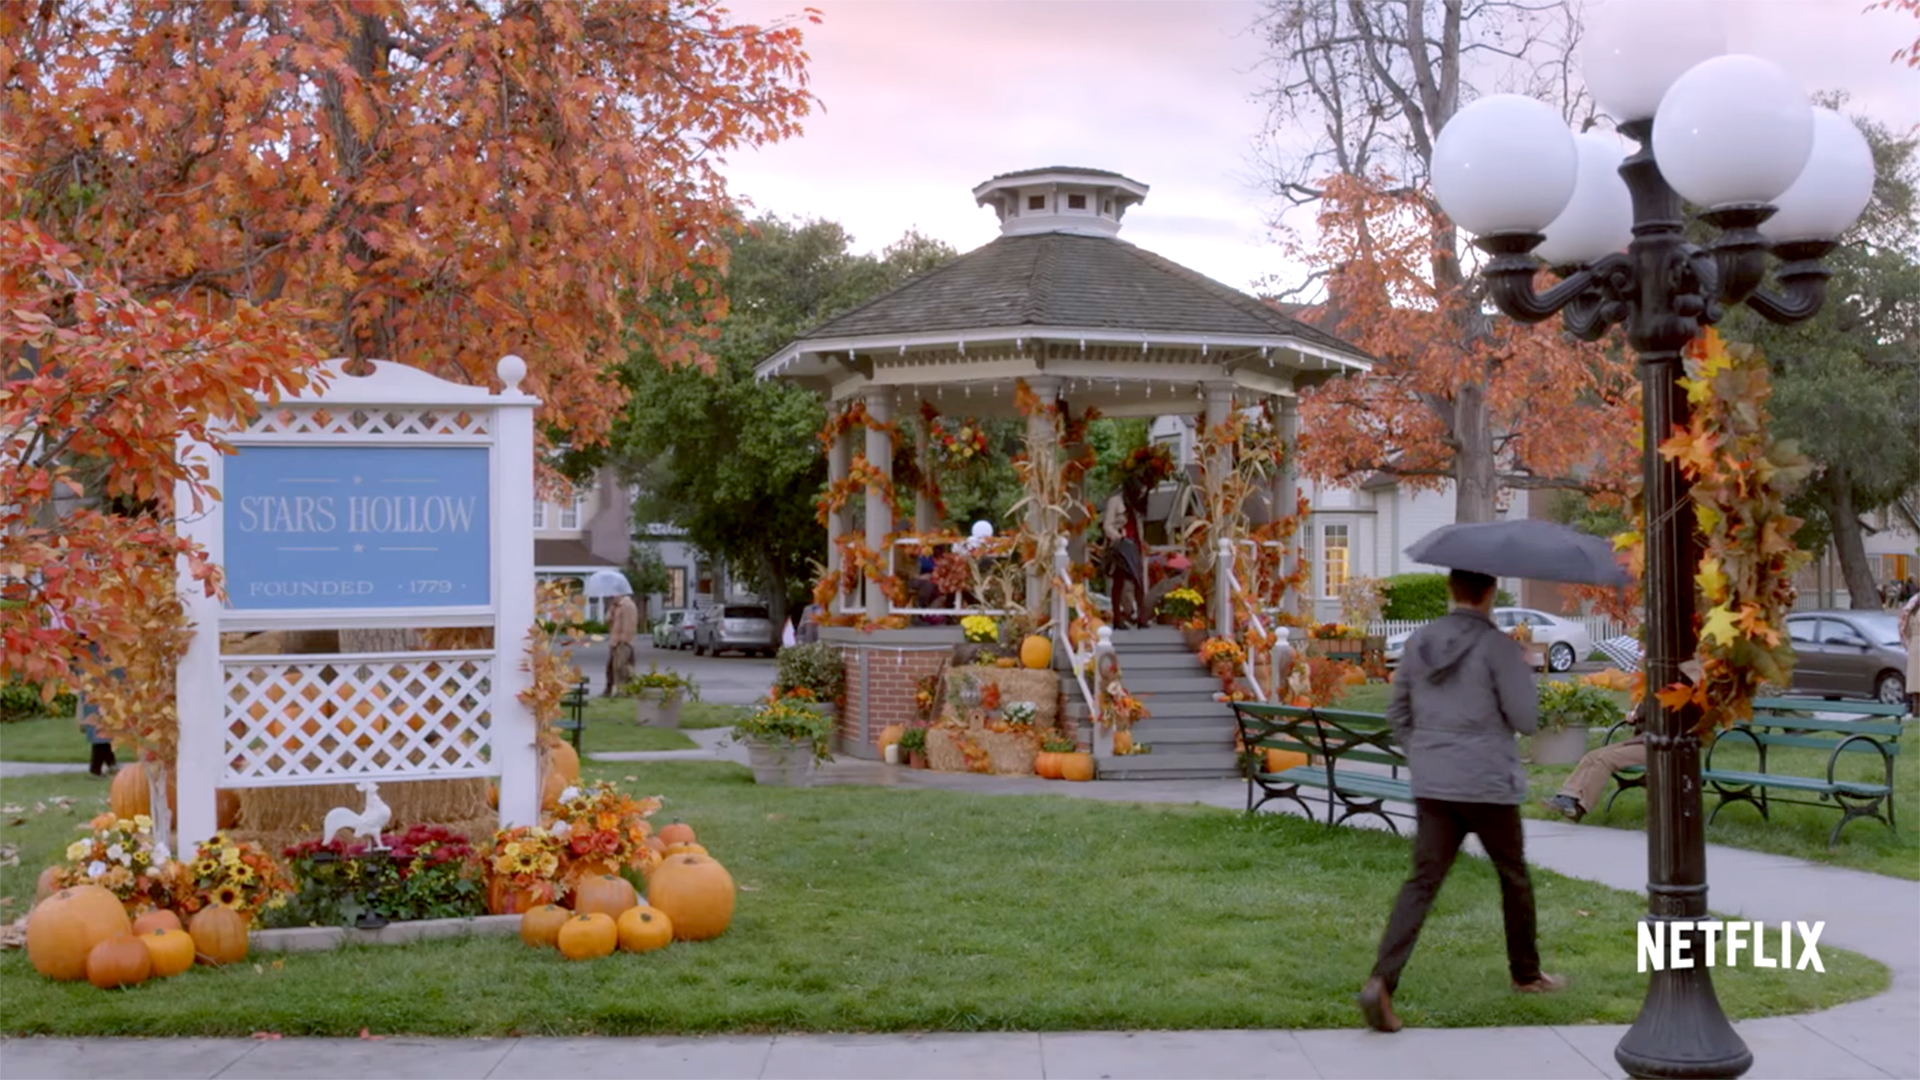 where can you visit stars hollow